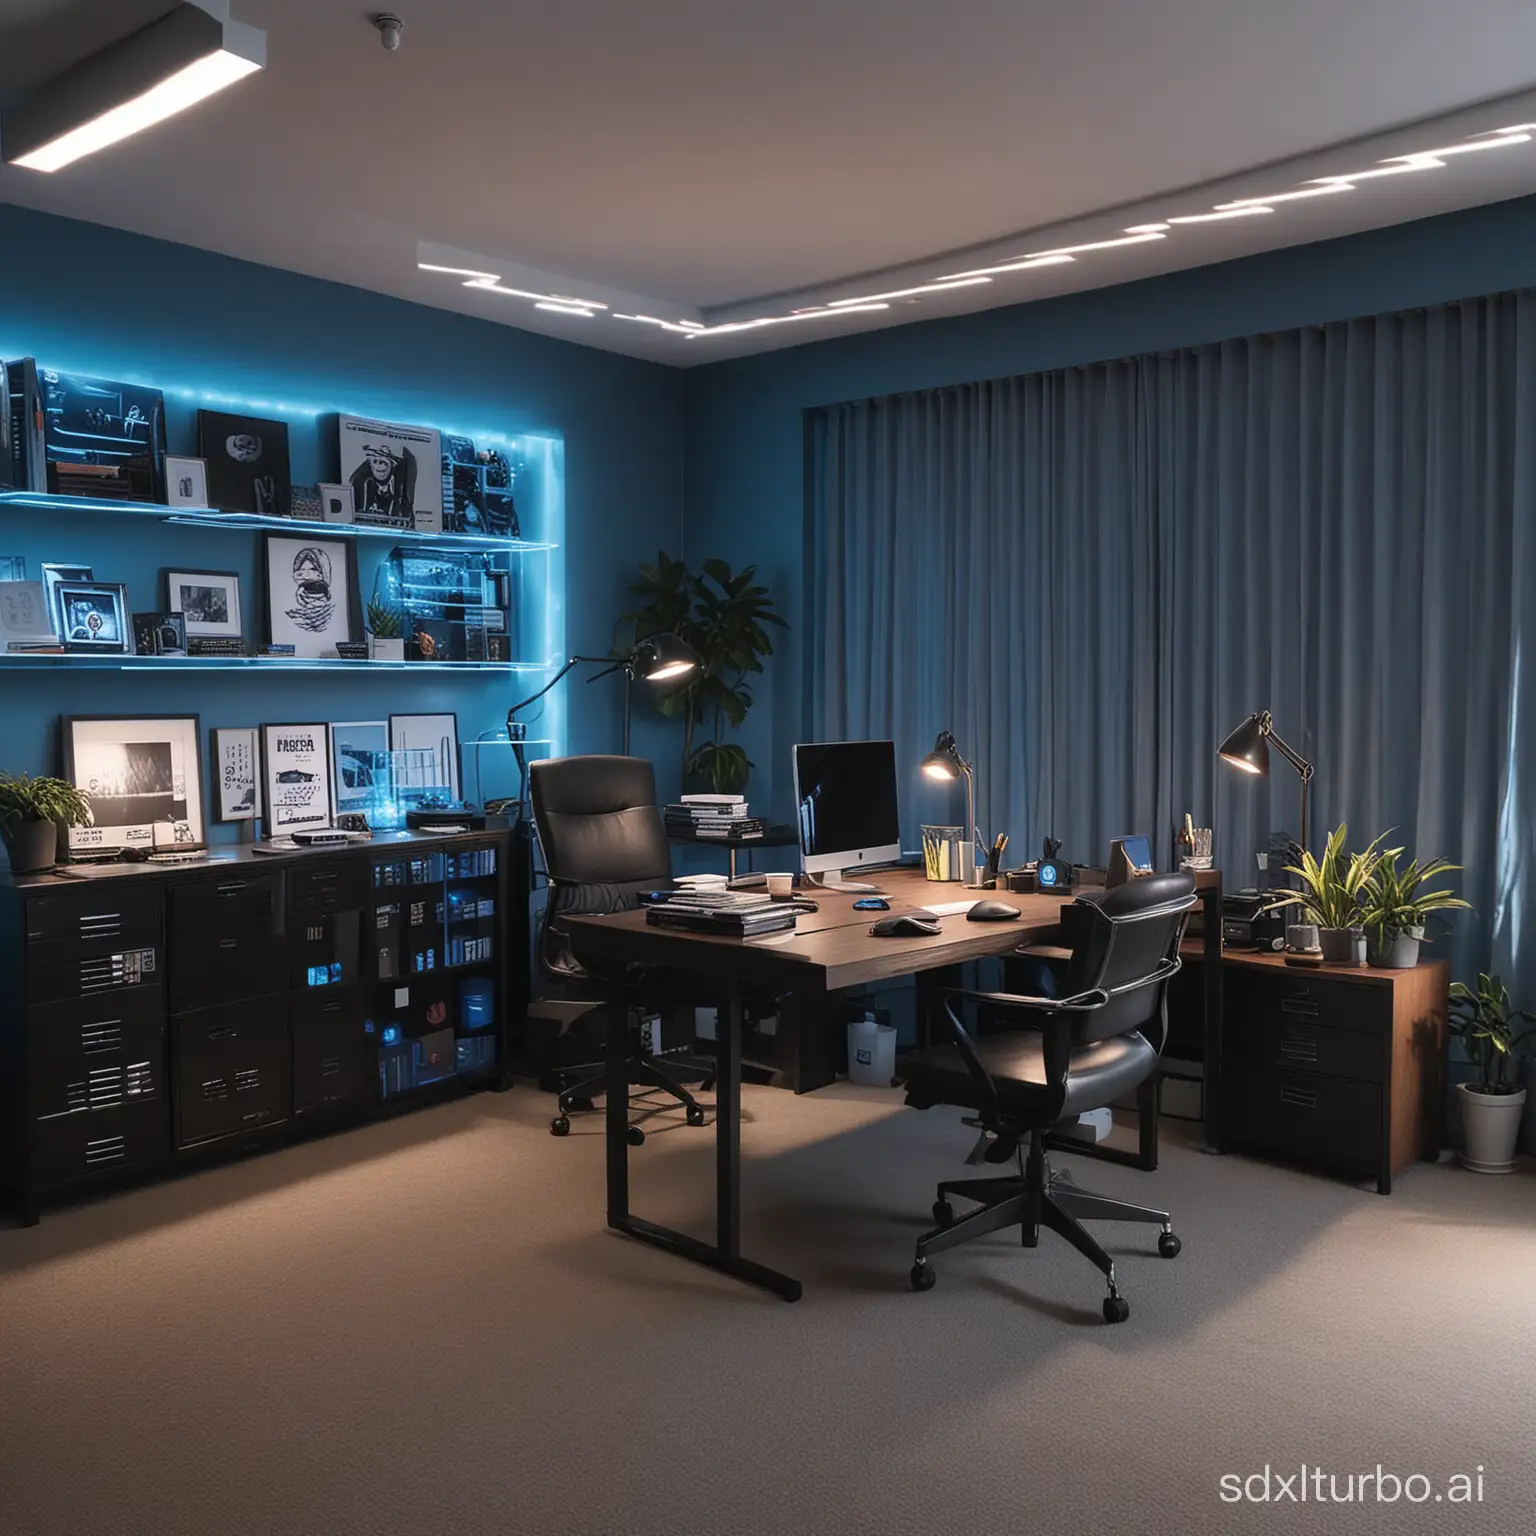 Stylish-Modern-Office-with-Blue-Lighting-Inspired-by-Movies-and-KDramas